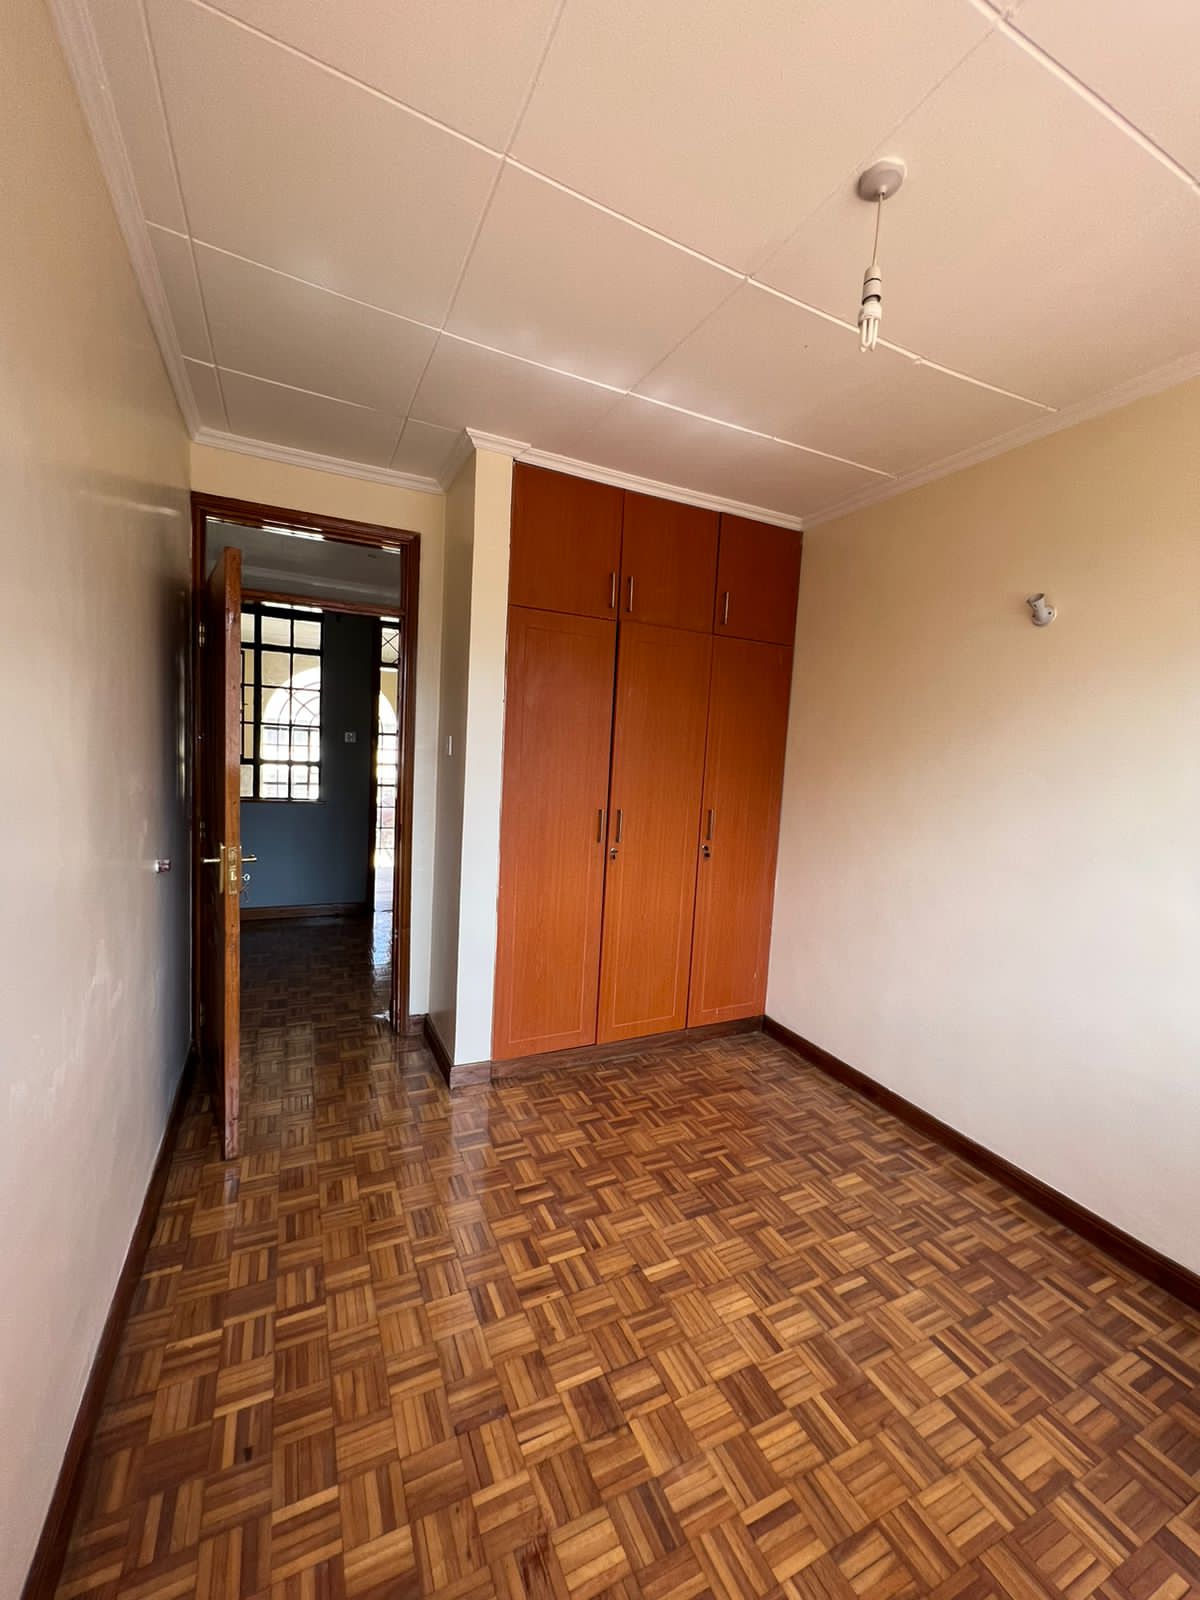 4 bedroom apartment to let and sale In the heart of Kilimani area. Musilli Homes